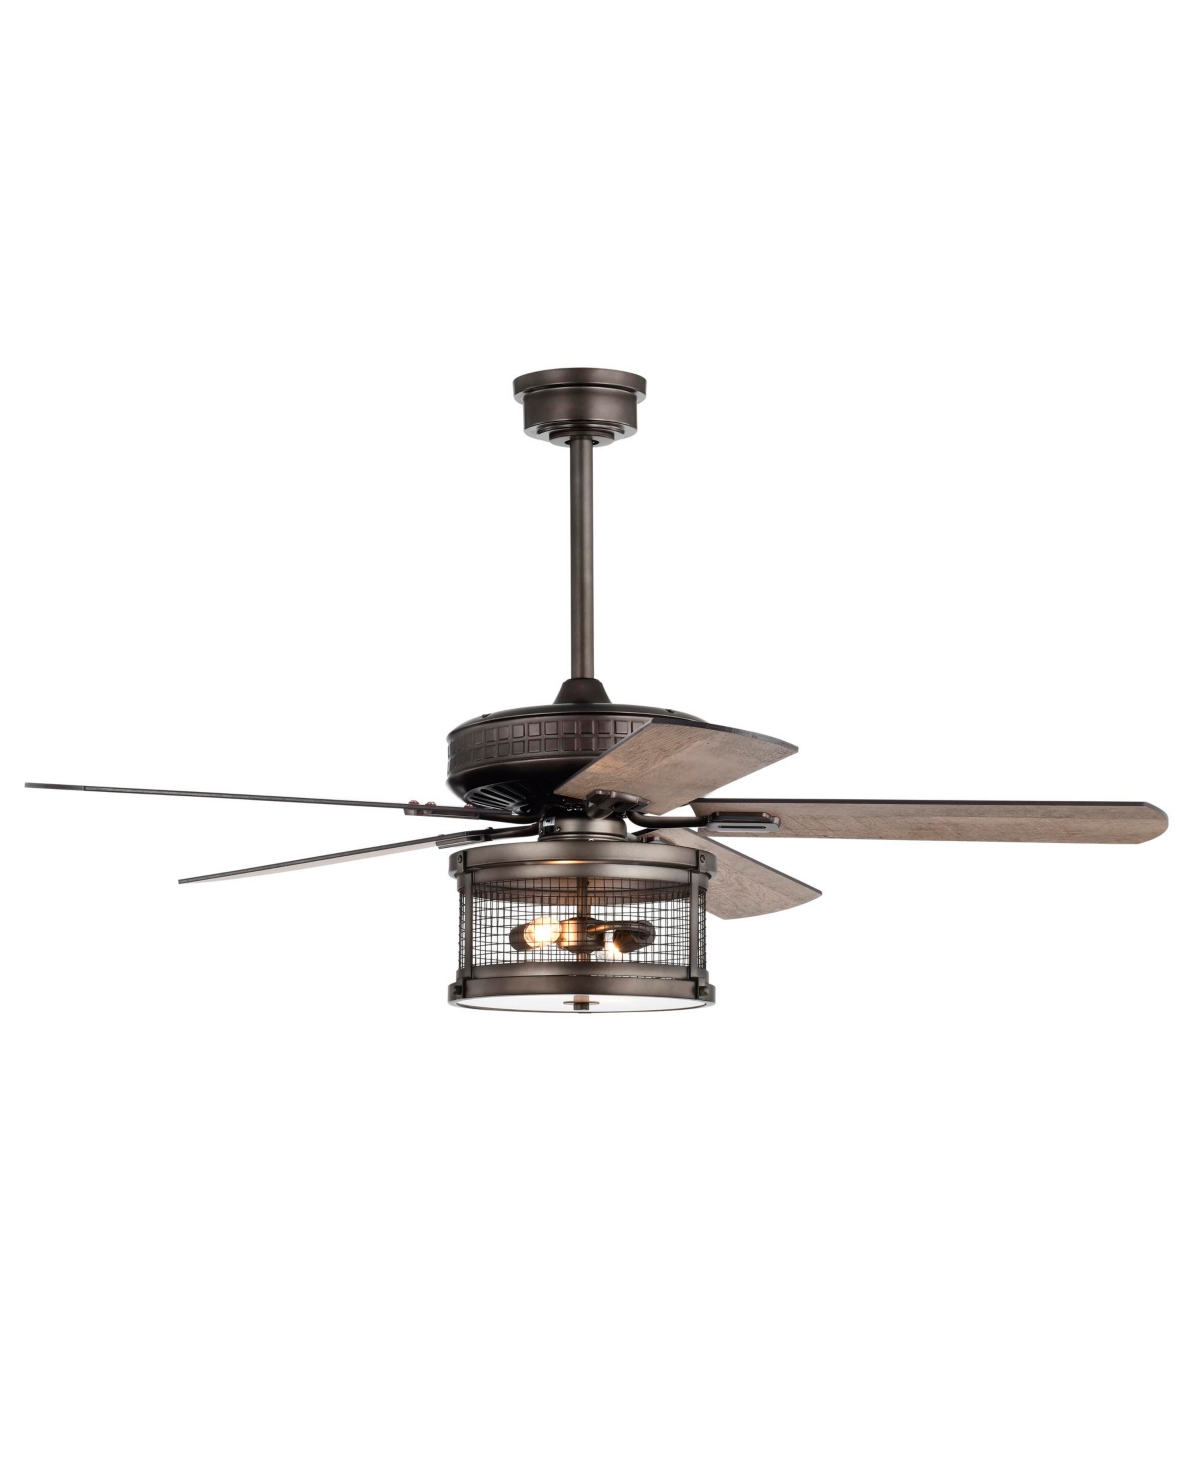 Home Accessories Cadence 52" 2-light Indoor Ceiling Fan With Light Kit And Remote In Bronze